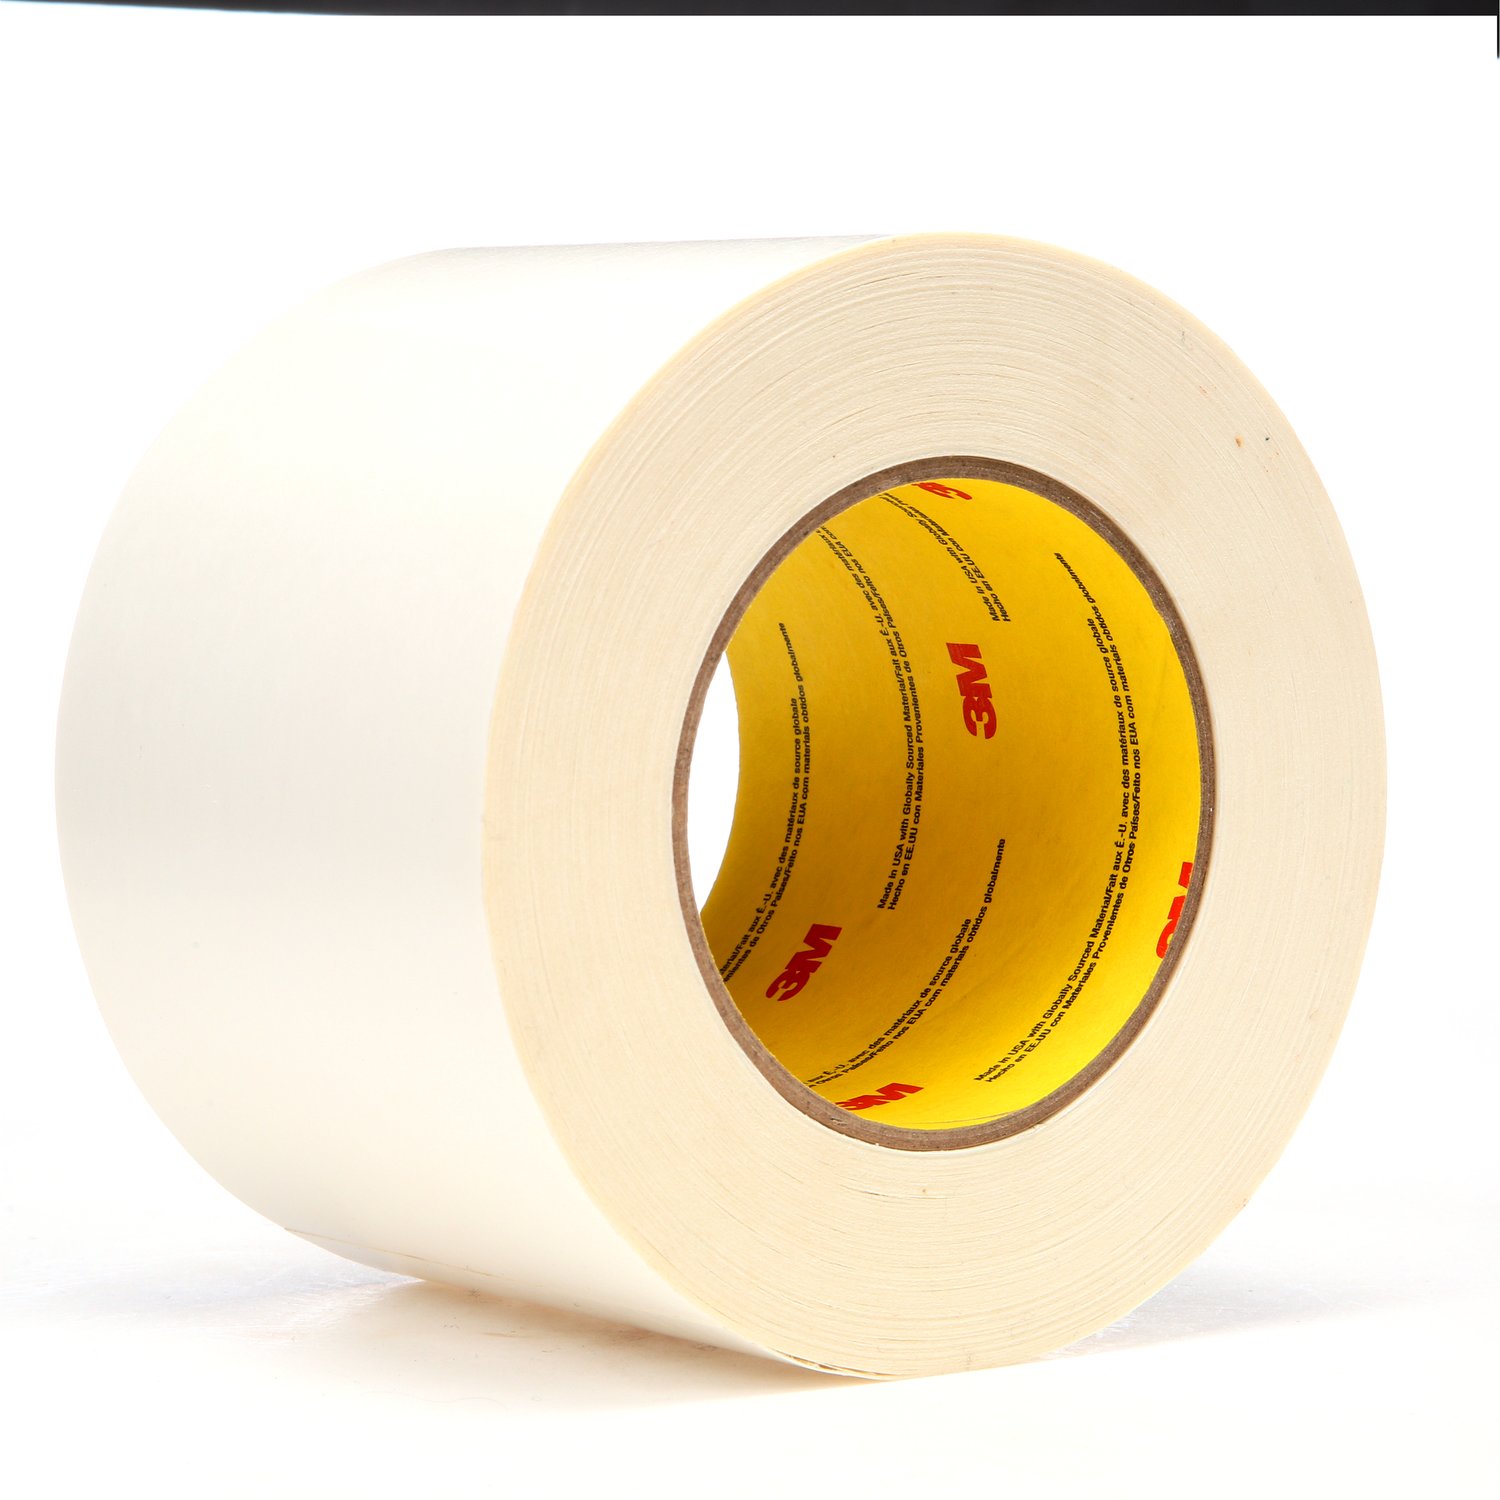 7100028060 - 3M Repulpable Double Coated Splicing Tape 9038W, White, 72 mm x 33 m, 3
mil, 12 rolls per case